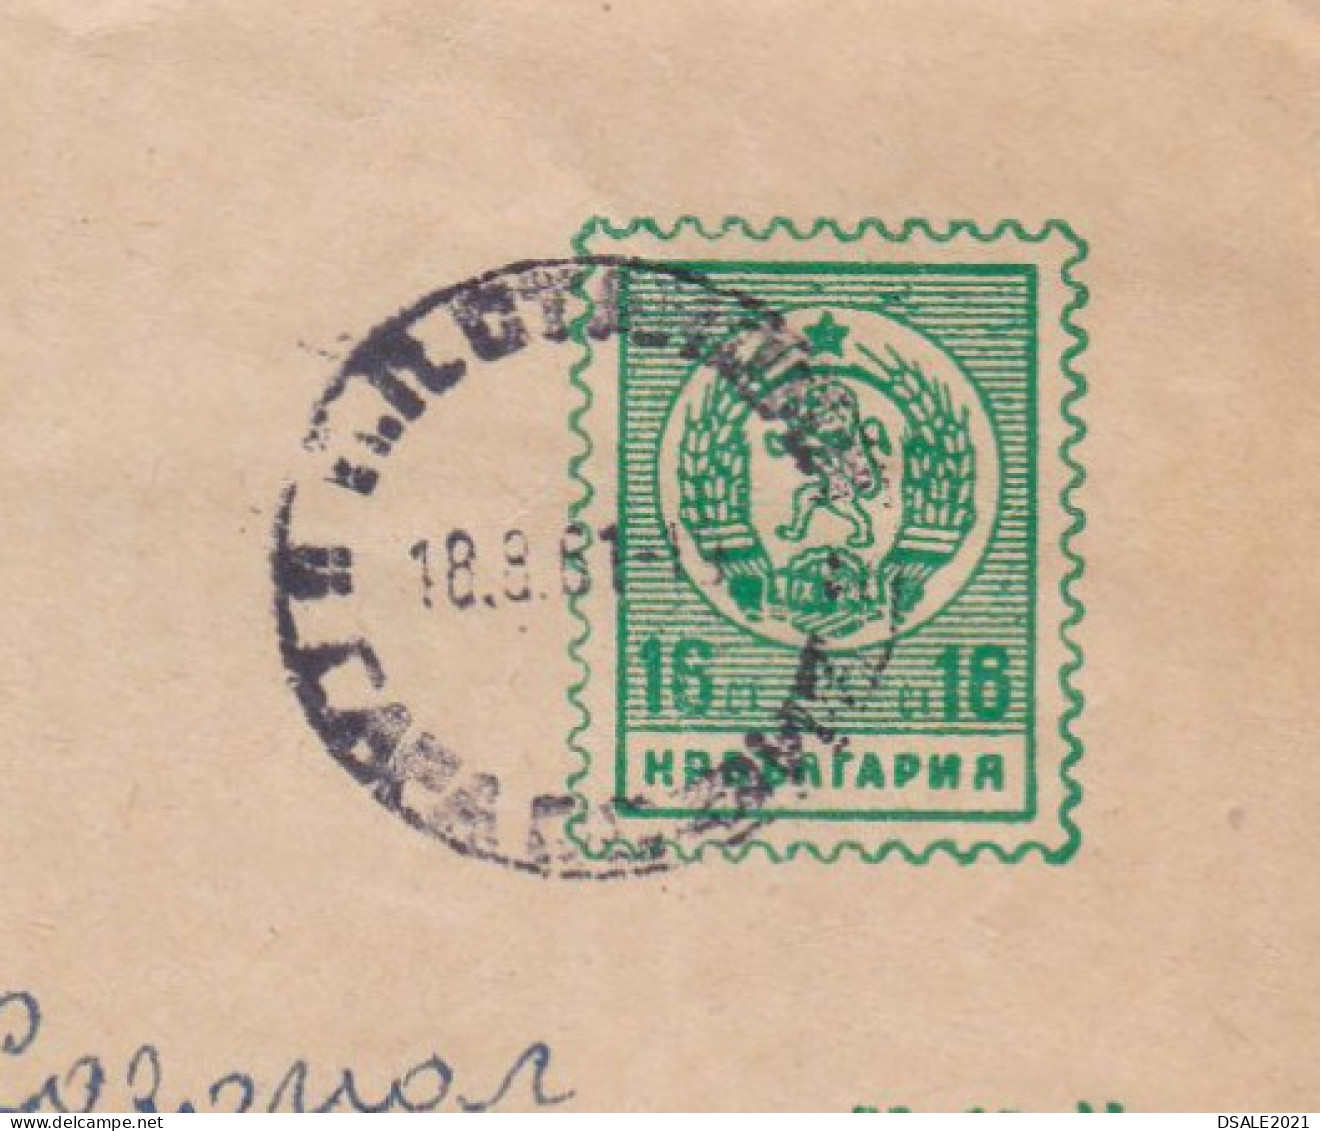 Bulgaria Bulgarie 1960s Postal Stationery Cover - 16St. (PLANT), Entier, Sent SOFIA Railway Station Post Office (68207) - Covers